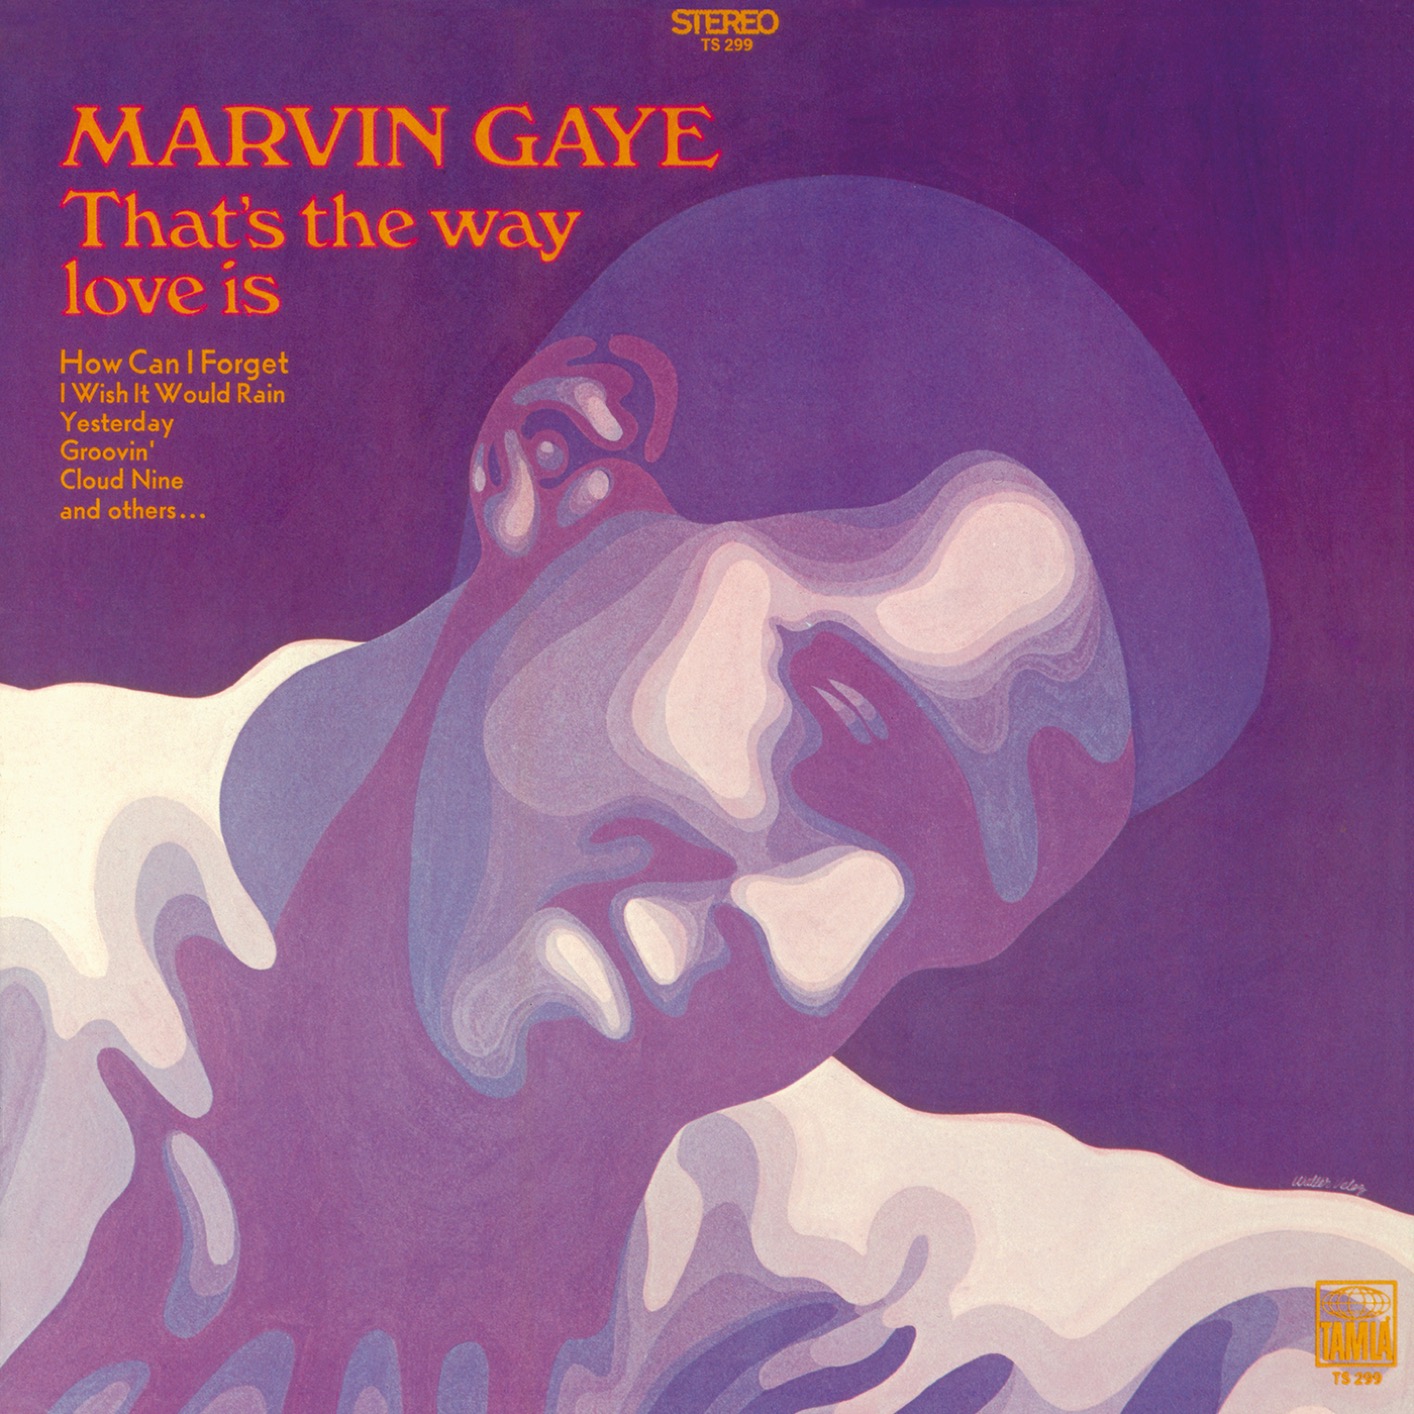 Marvin Gaye - I Want You (180g Vinyl LP) - Music Direct